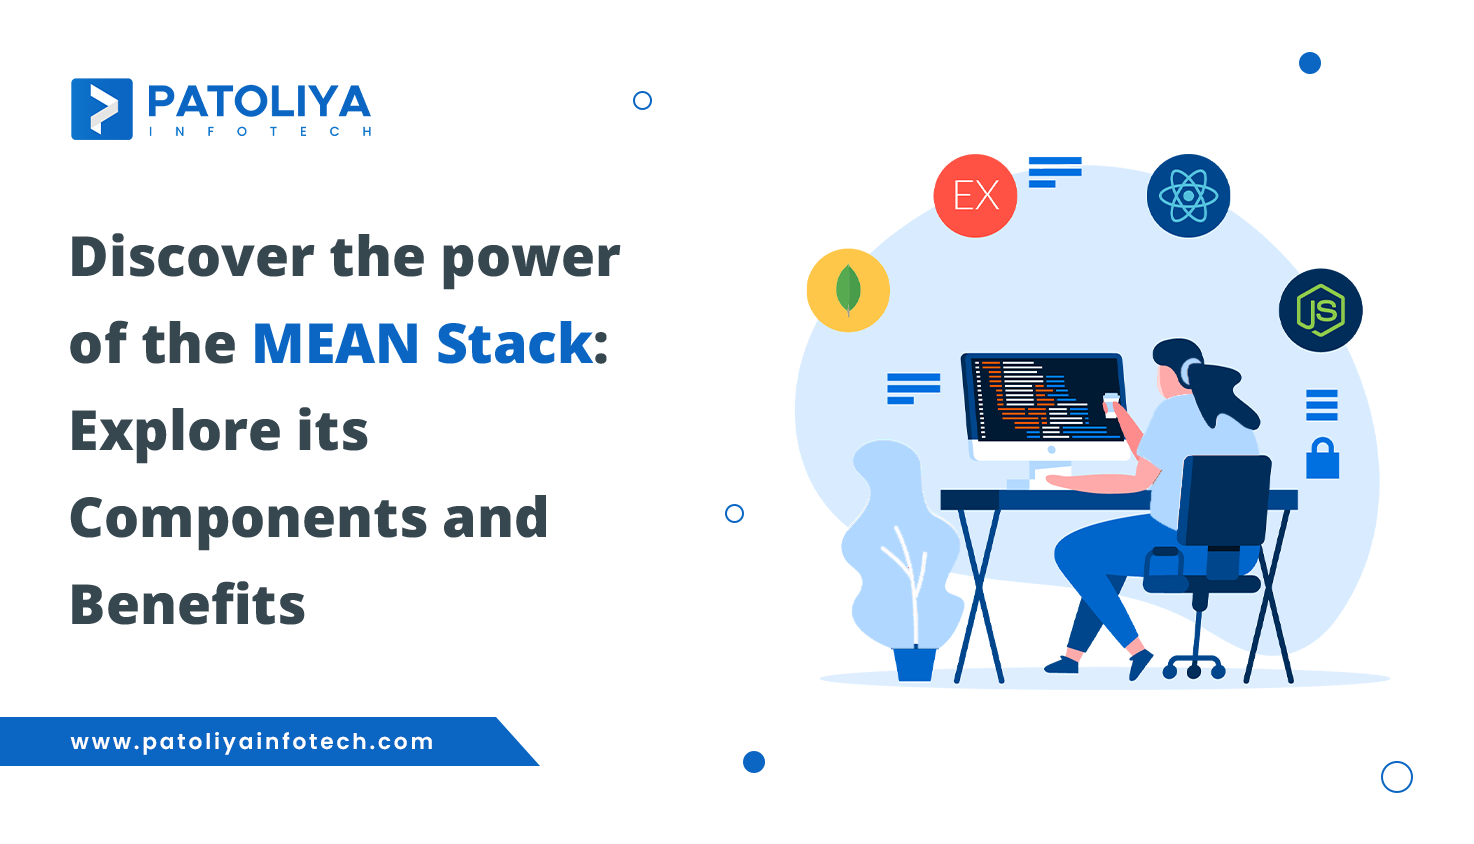 Discover the power of the MEAN Stack: Explore its Components and Benefits